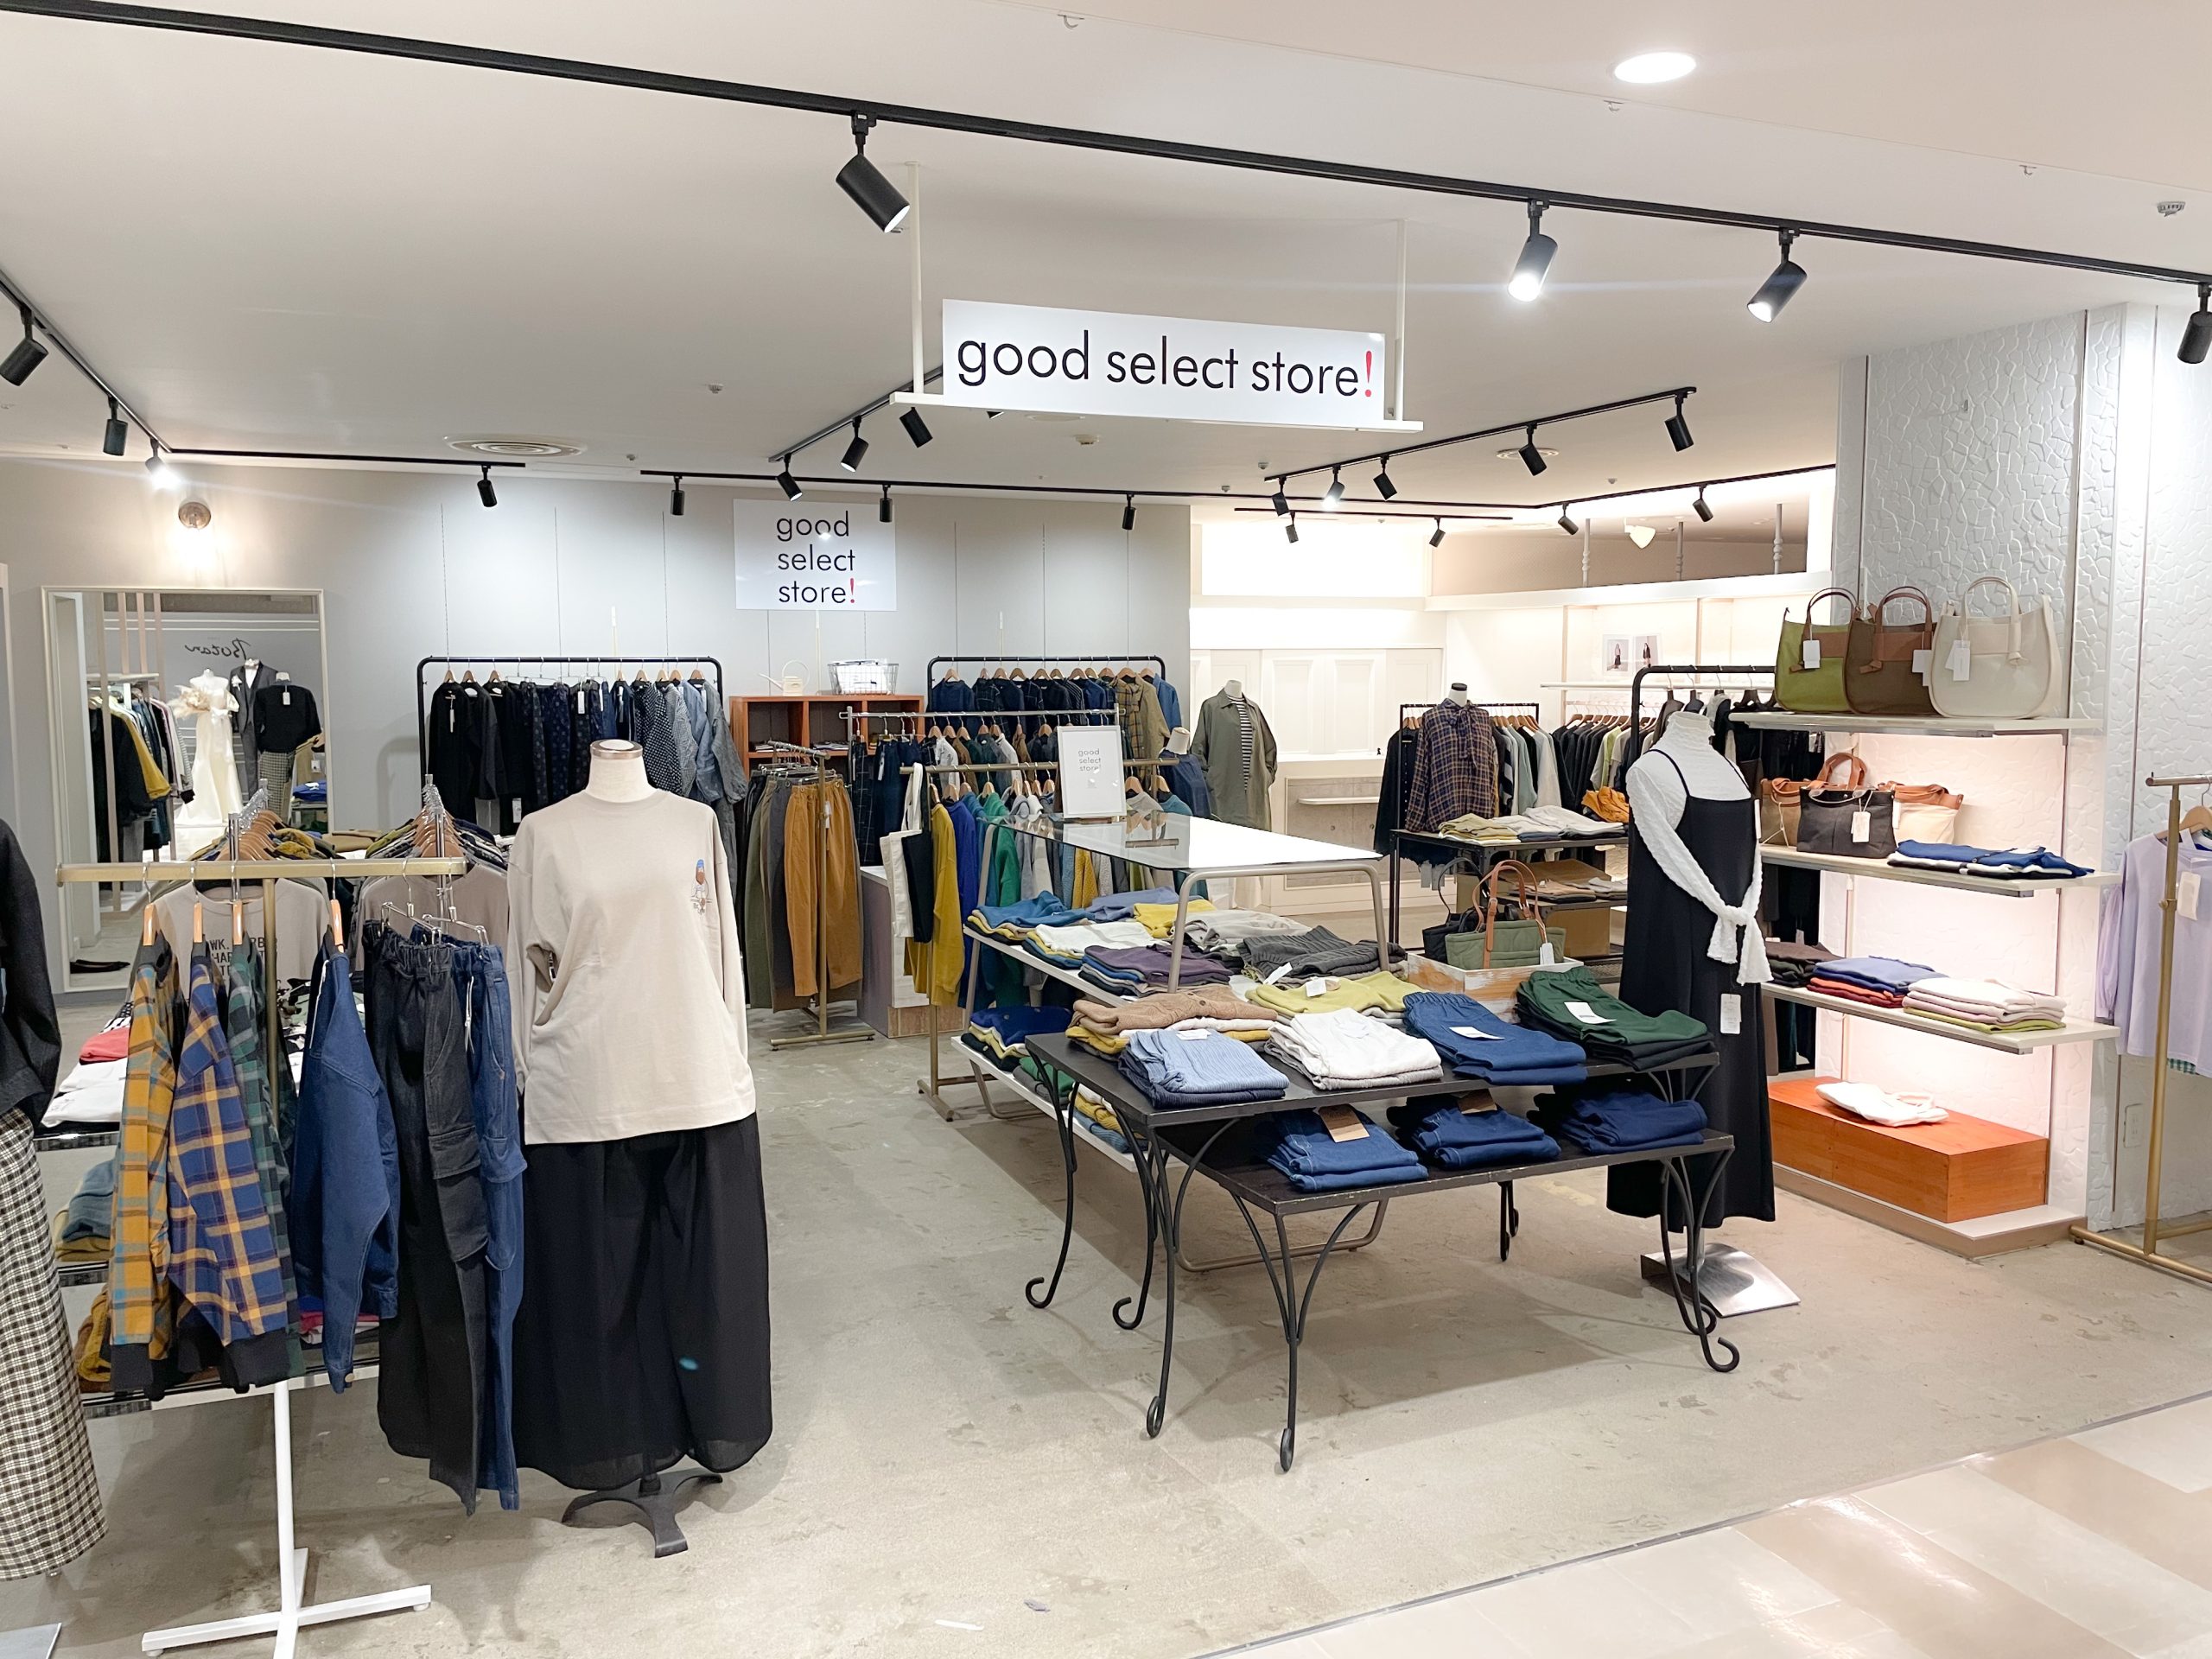 05 good select store!